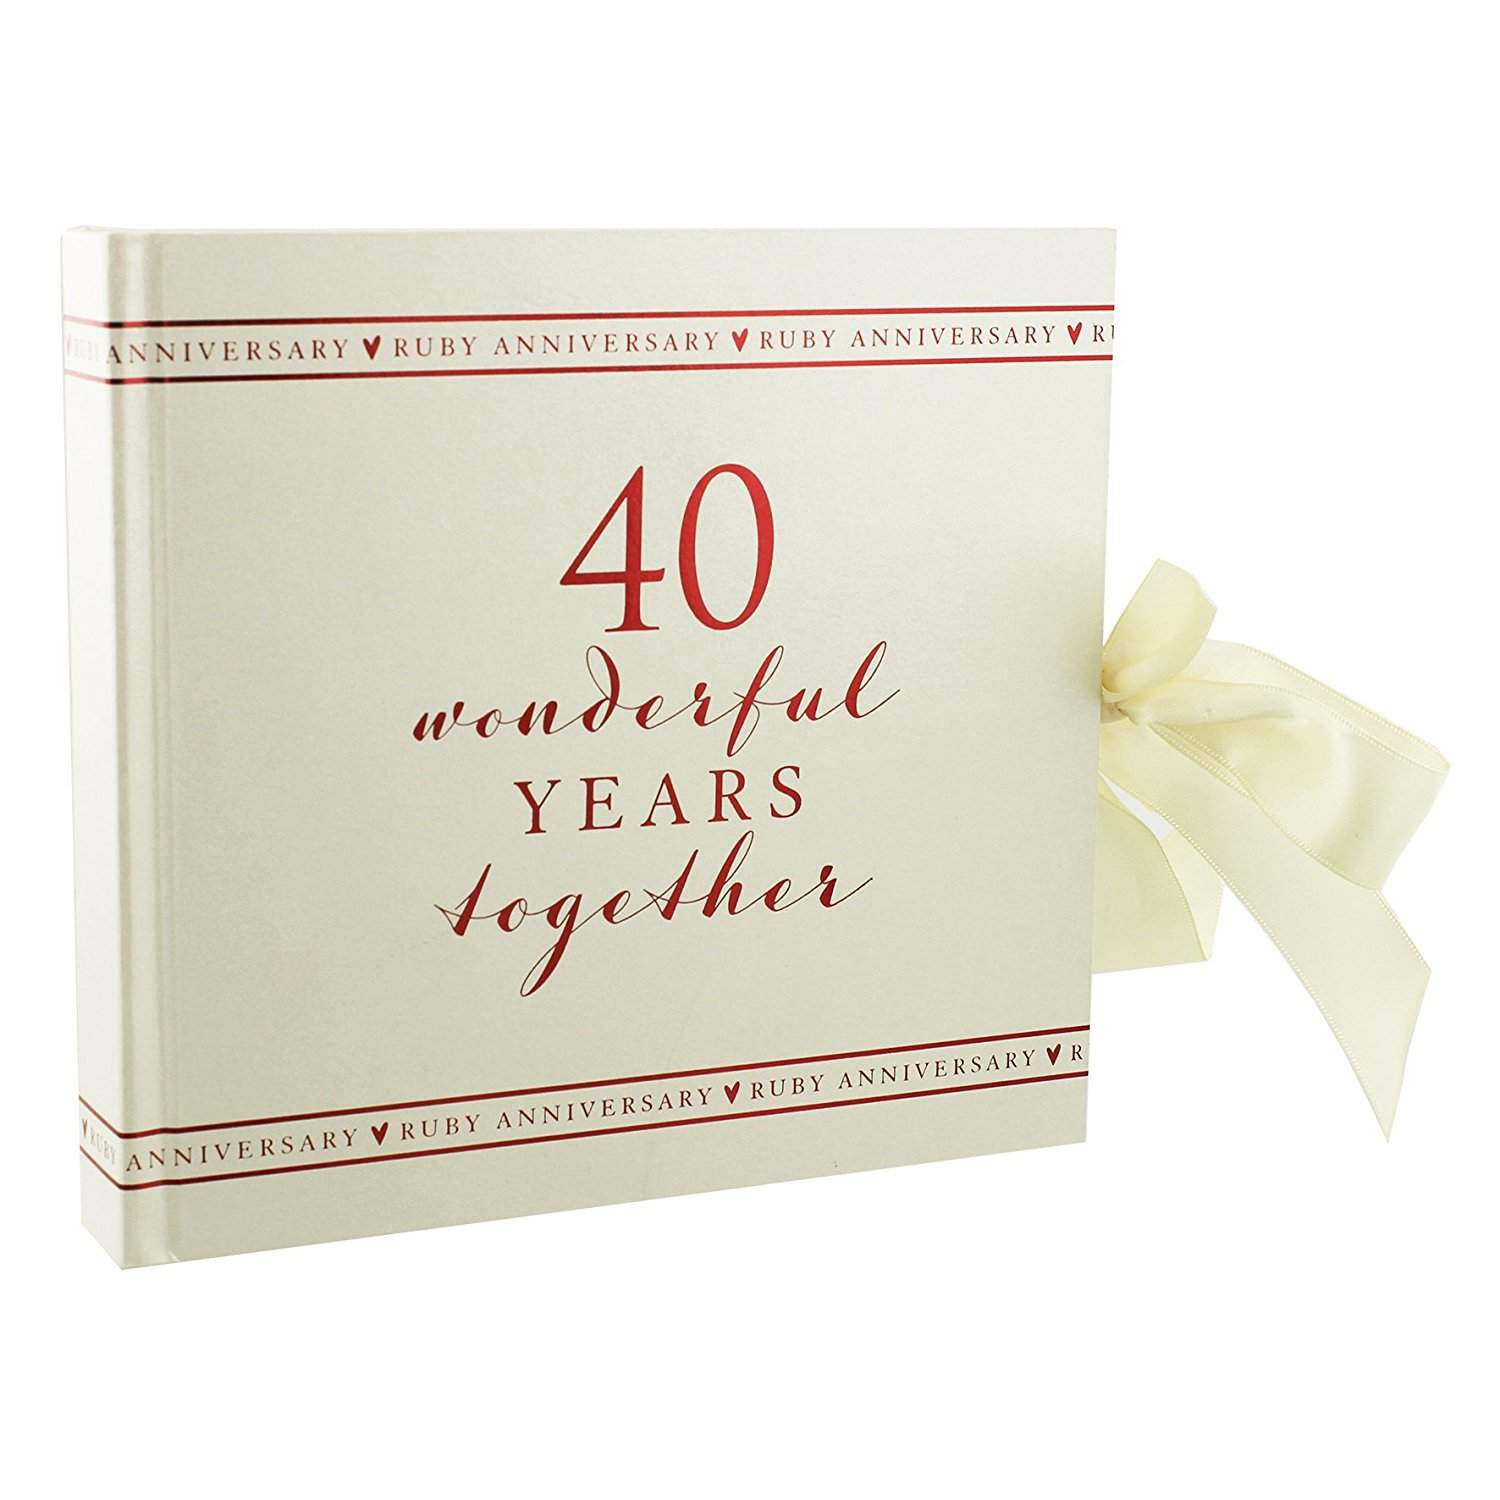 40th Wedding Anniversary Traditional Gift
 Top 10 Best 40th Wedding Anniversary Gifts